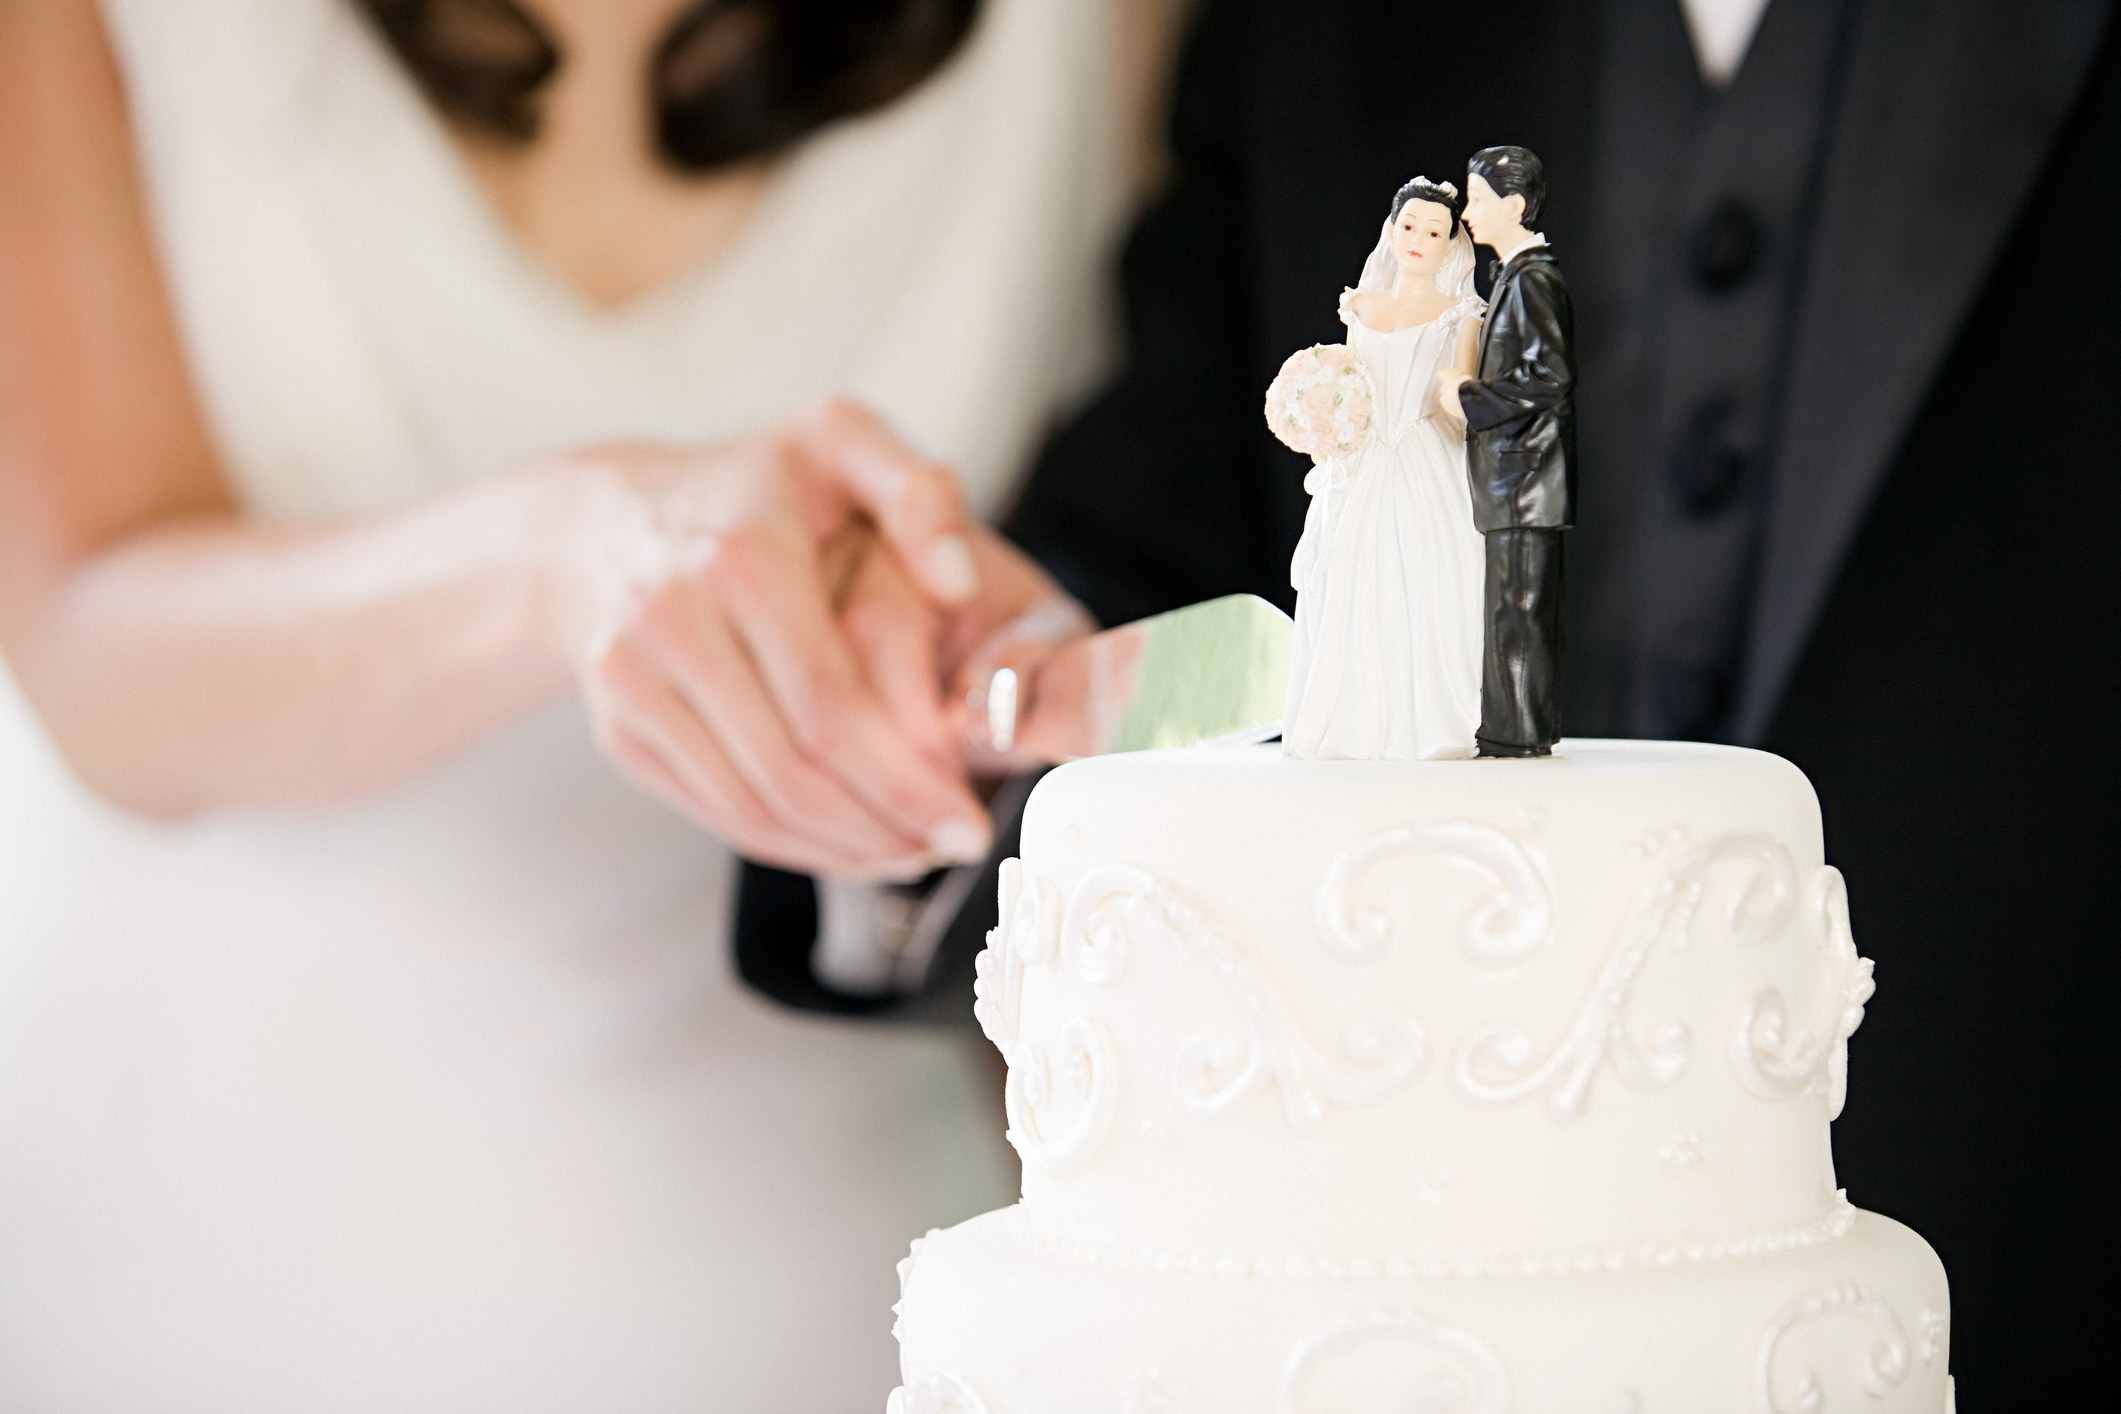 Close-up of a wedding cake being cut, with a bride-and-groom topper